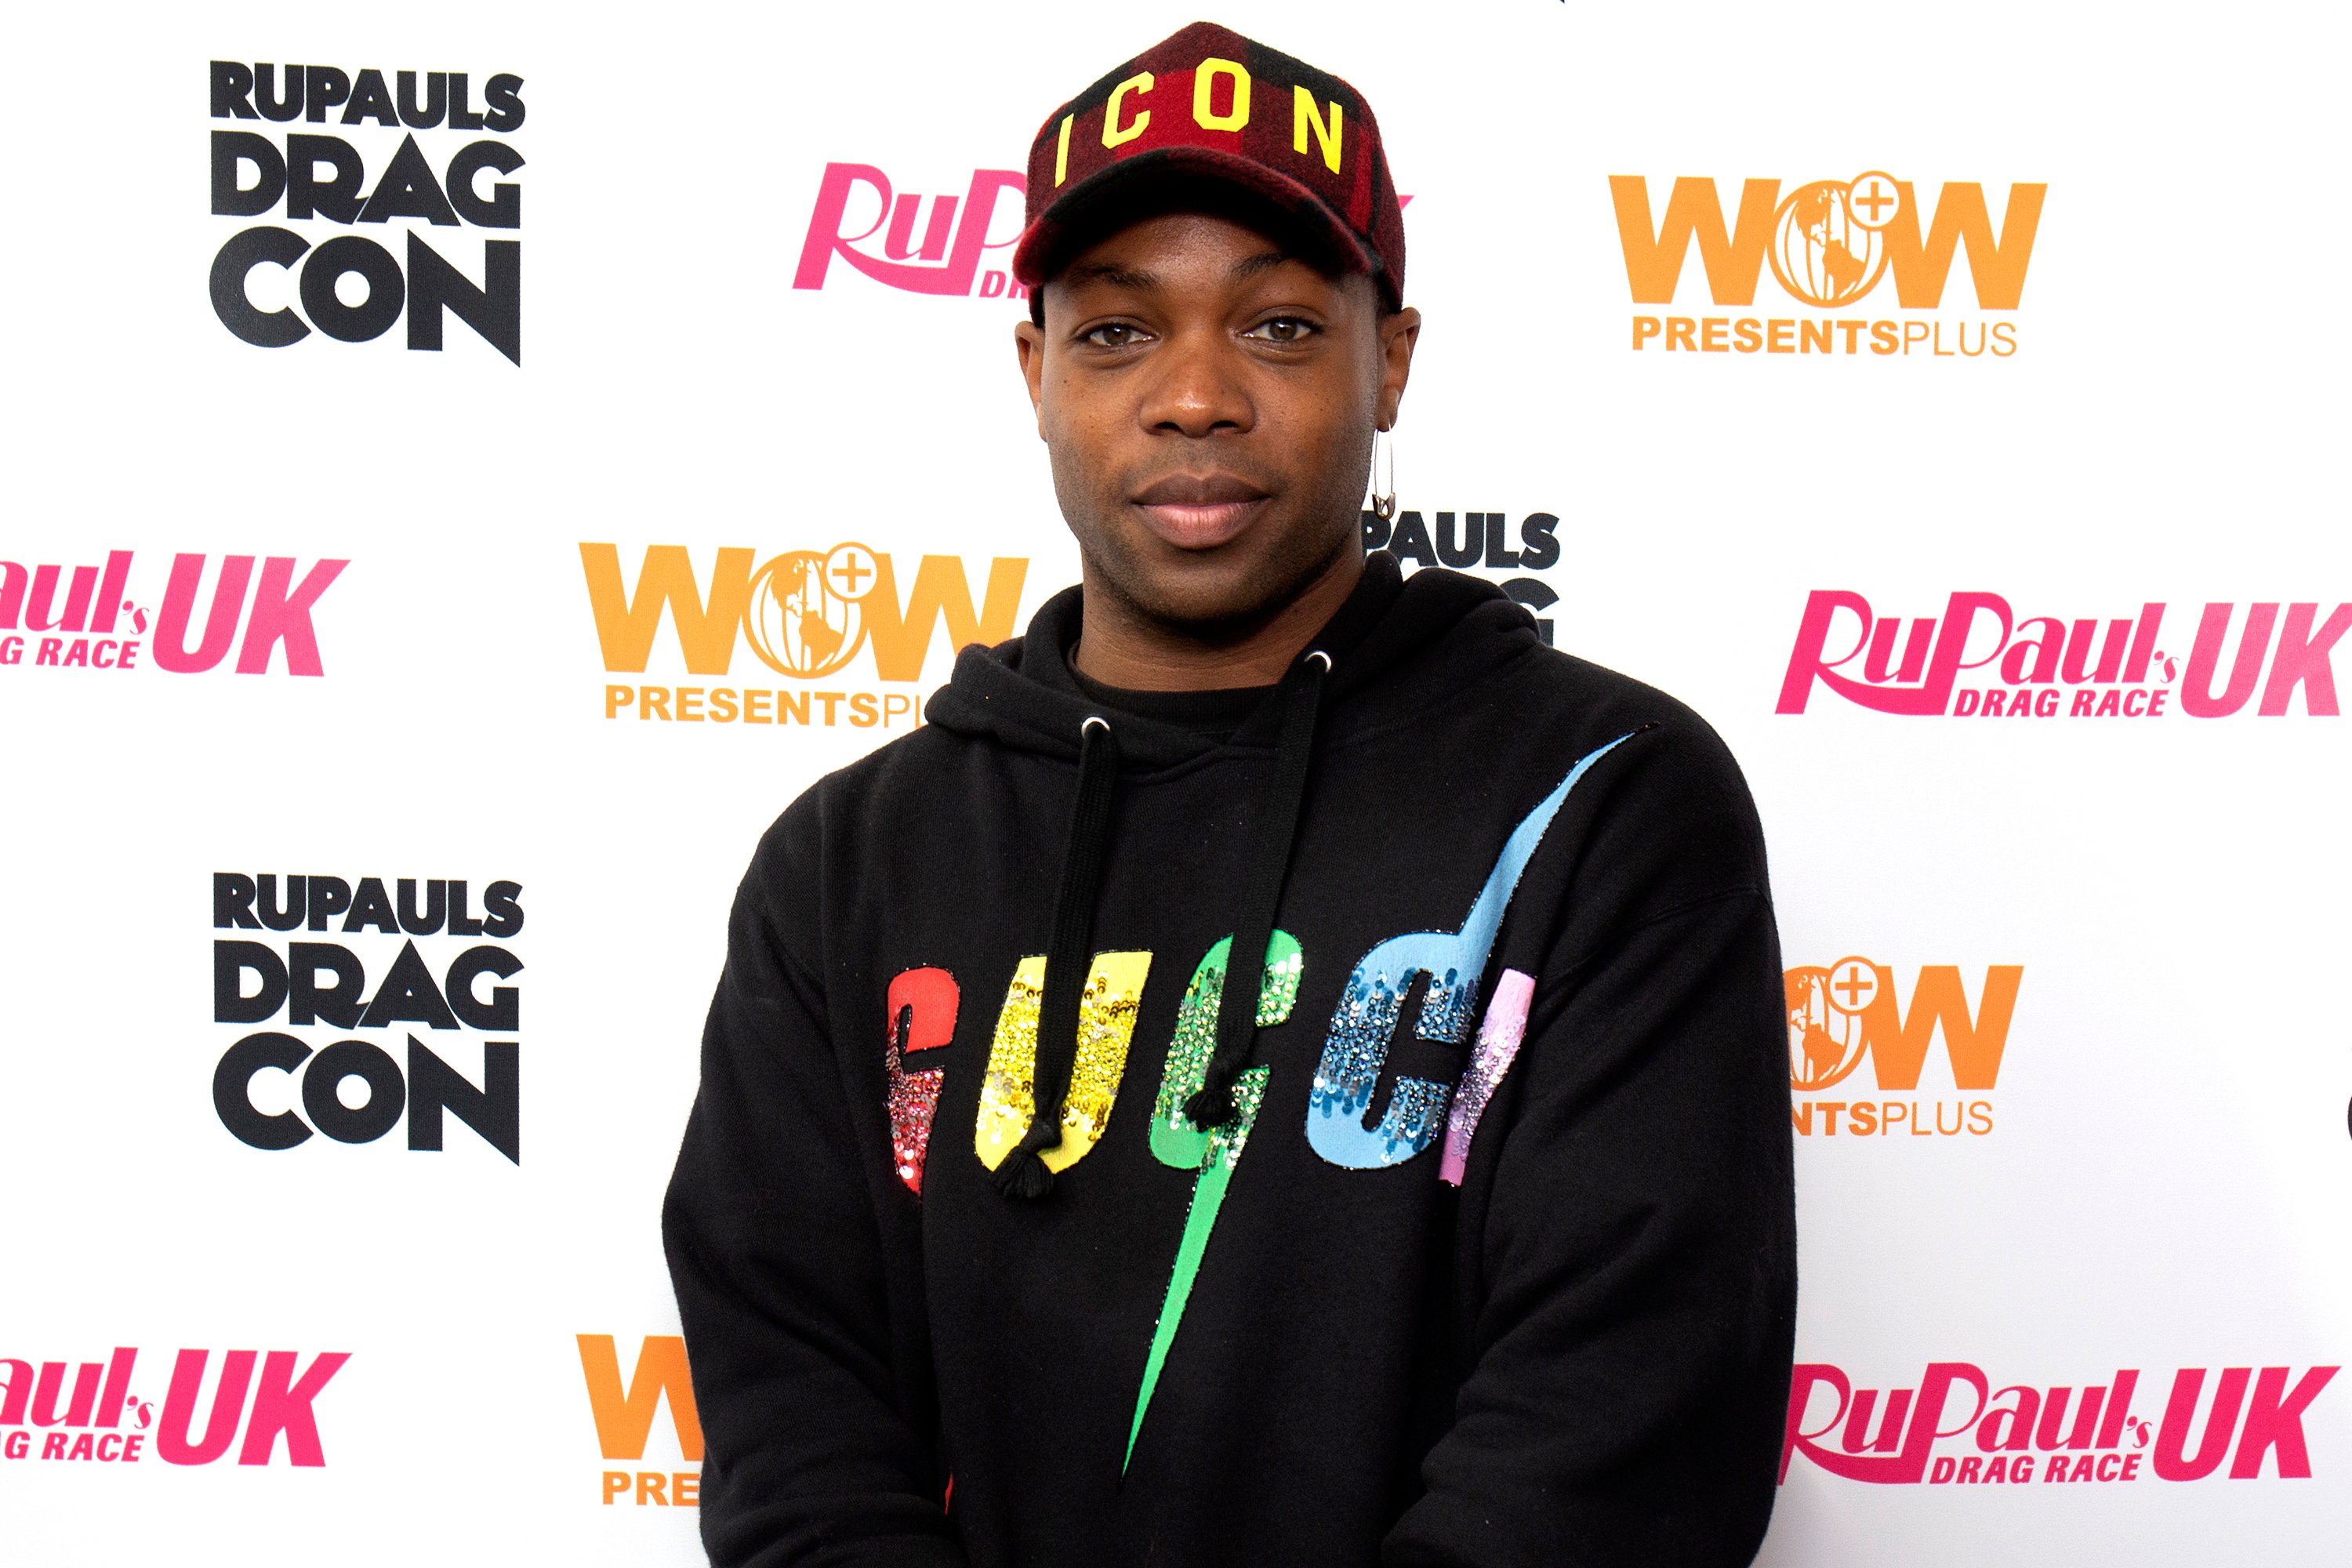 Todrick Hall smiling and posing during RuPaul's DragCon 2019